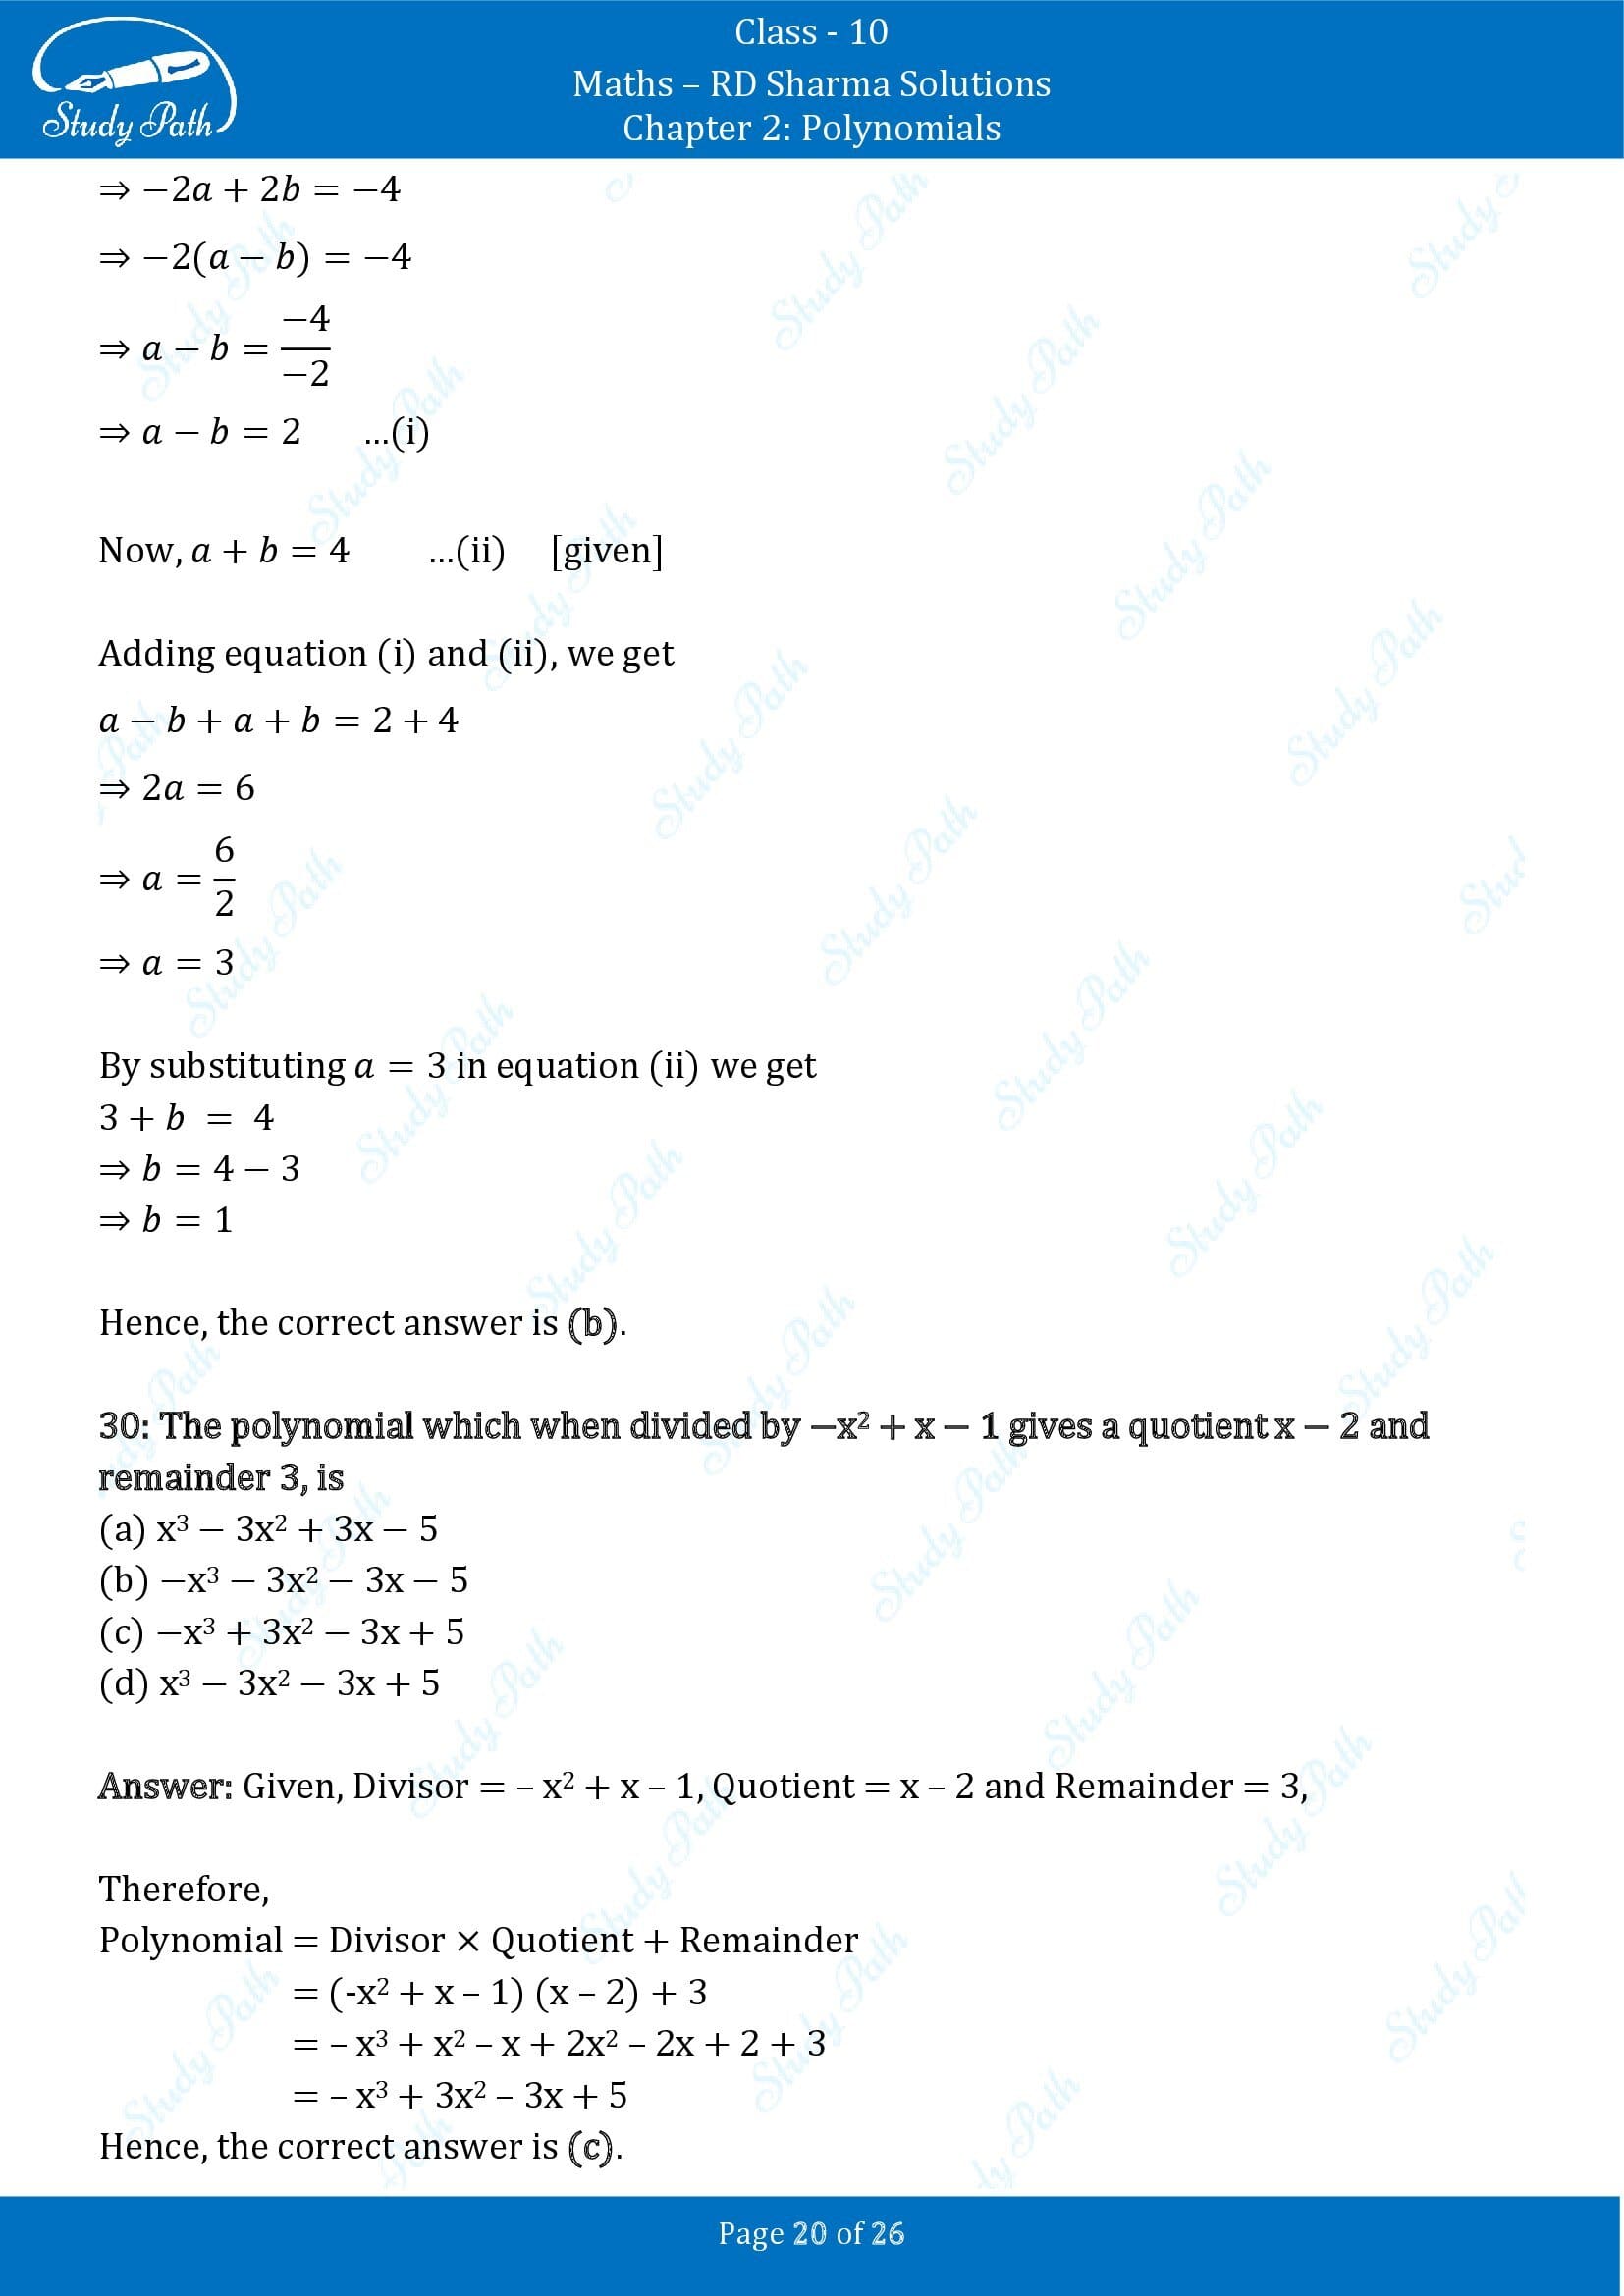 RD Sharma Solutions Class 10 Chapter 2 Polynomials Multiple Choice Questions MCQs 00020